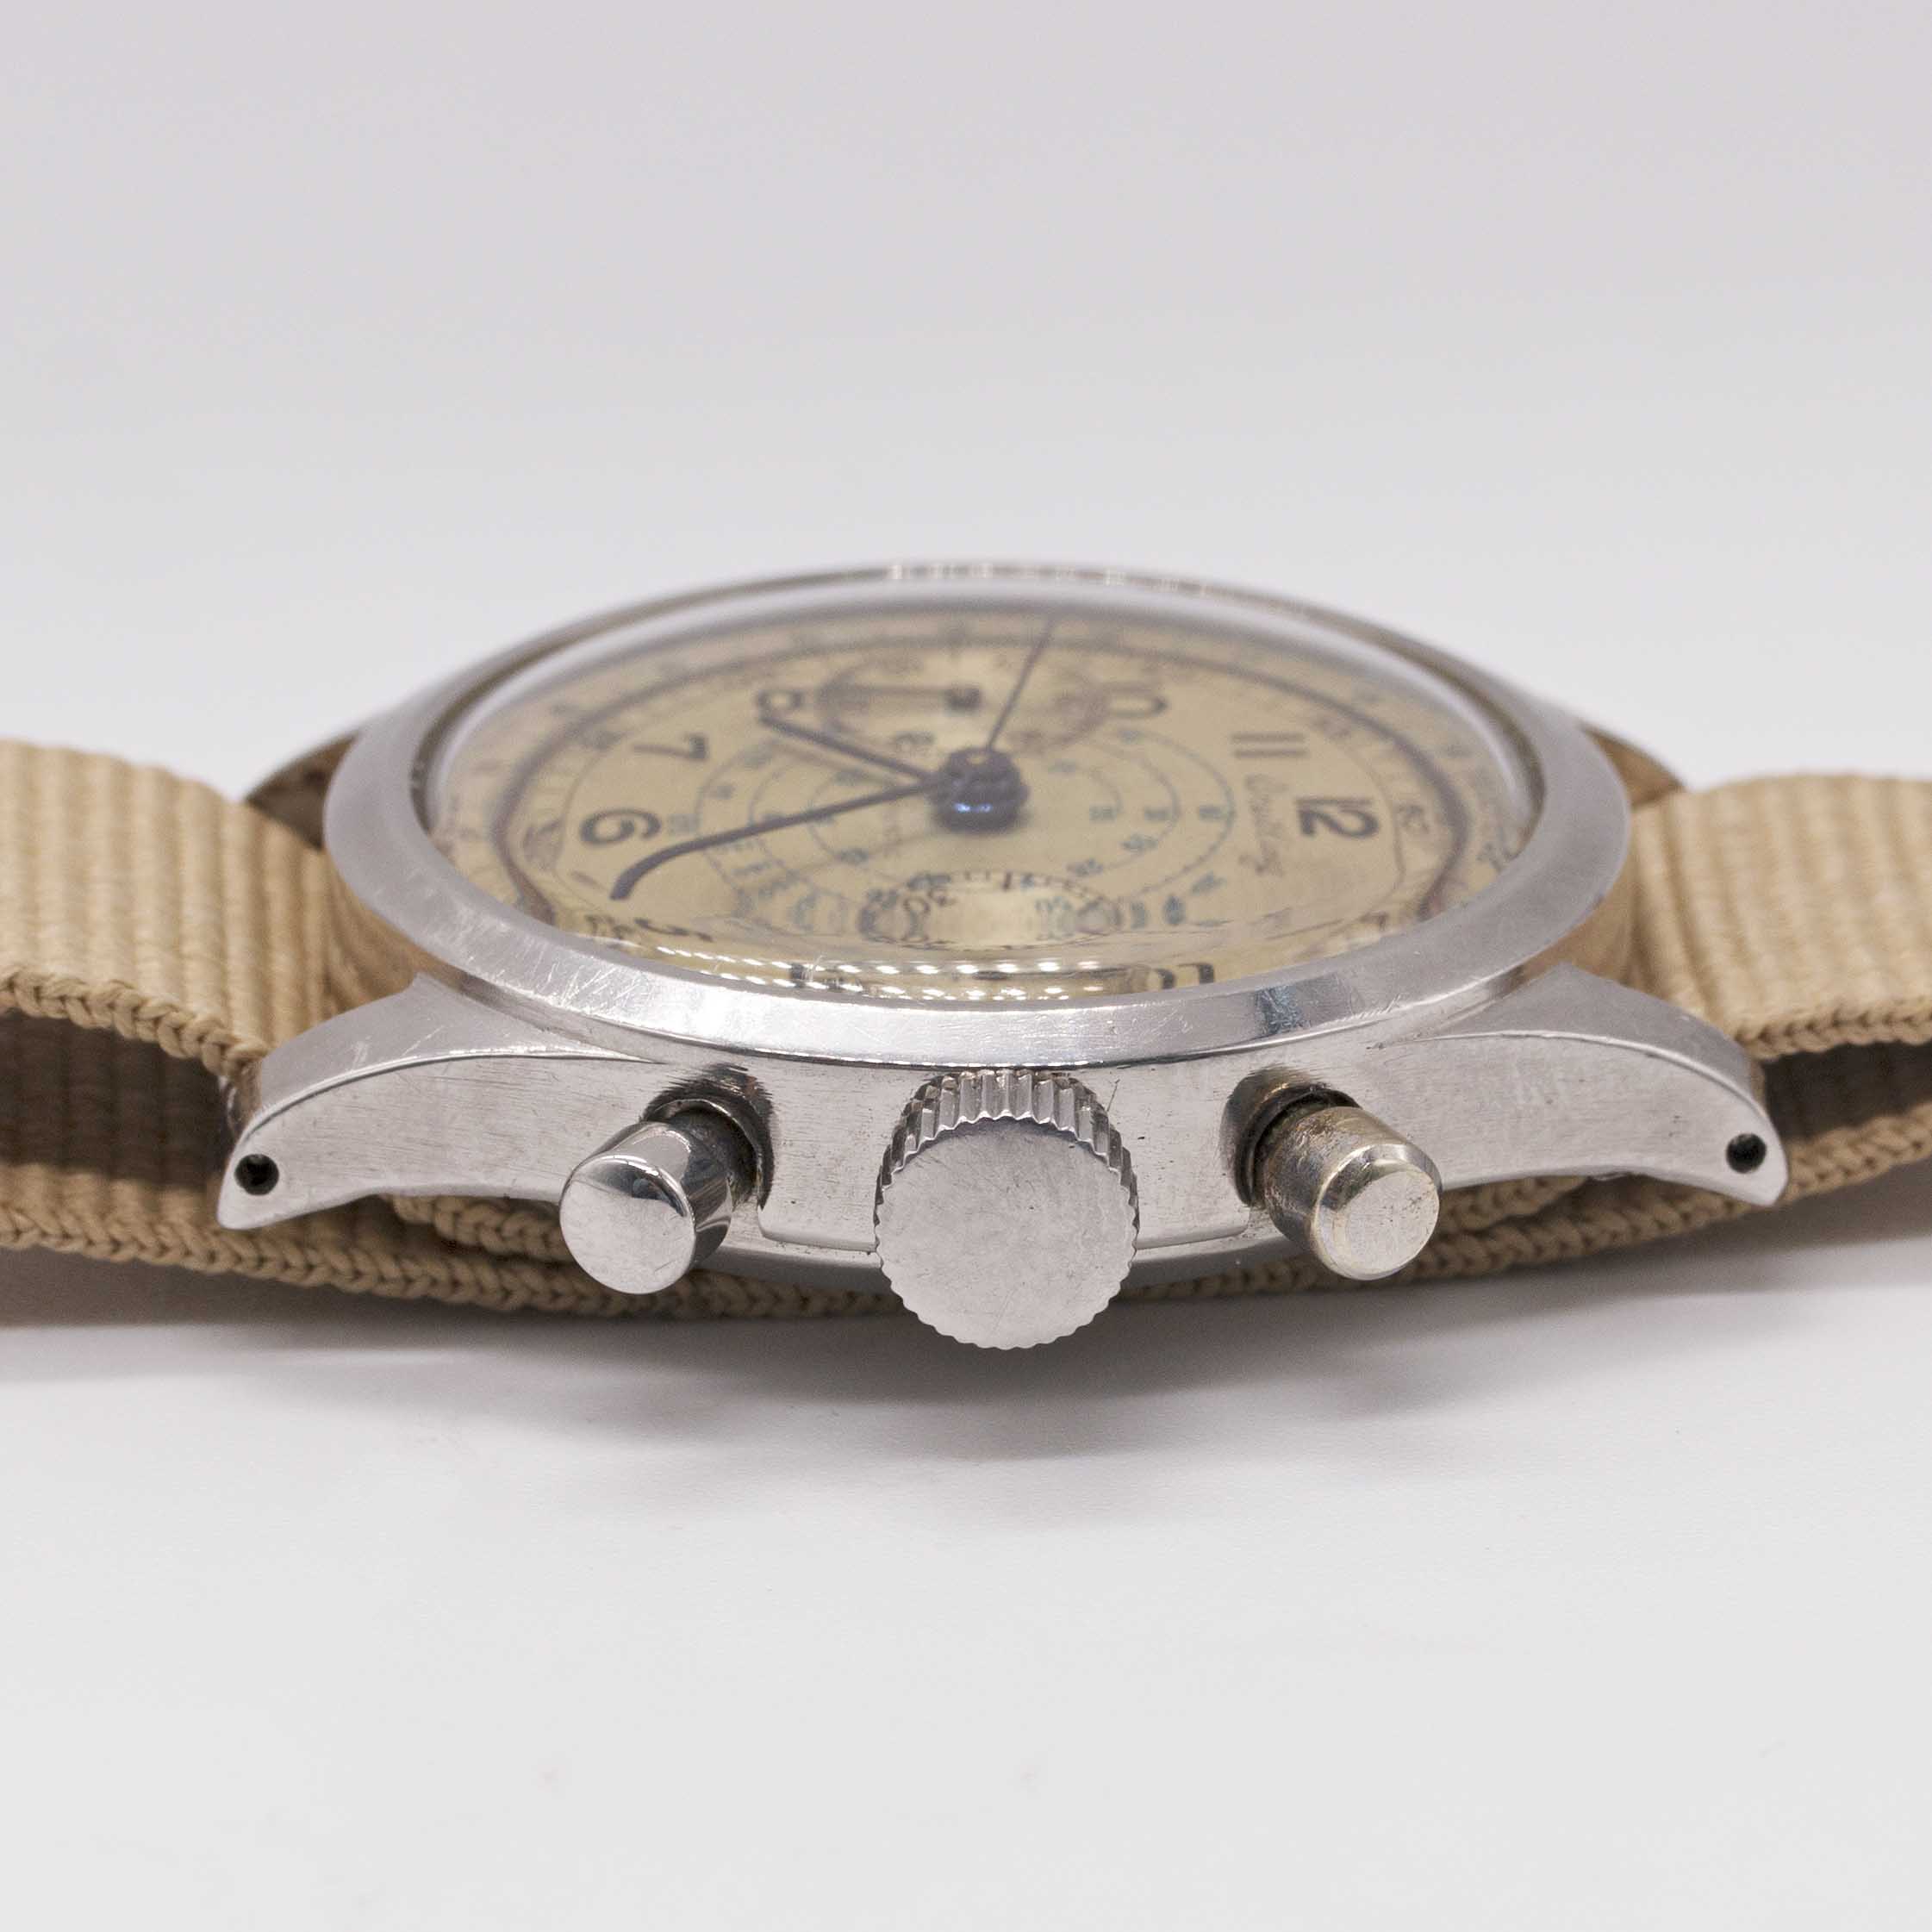 A RARE GENTLEMAN'S STAINLESS STEEL BREITLING ANTIMAGNETIC WATERPROOF "CLAMSHELL" CHRONOGRAPH WRIST - Image 8 of 10